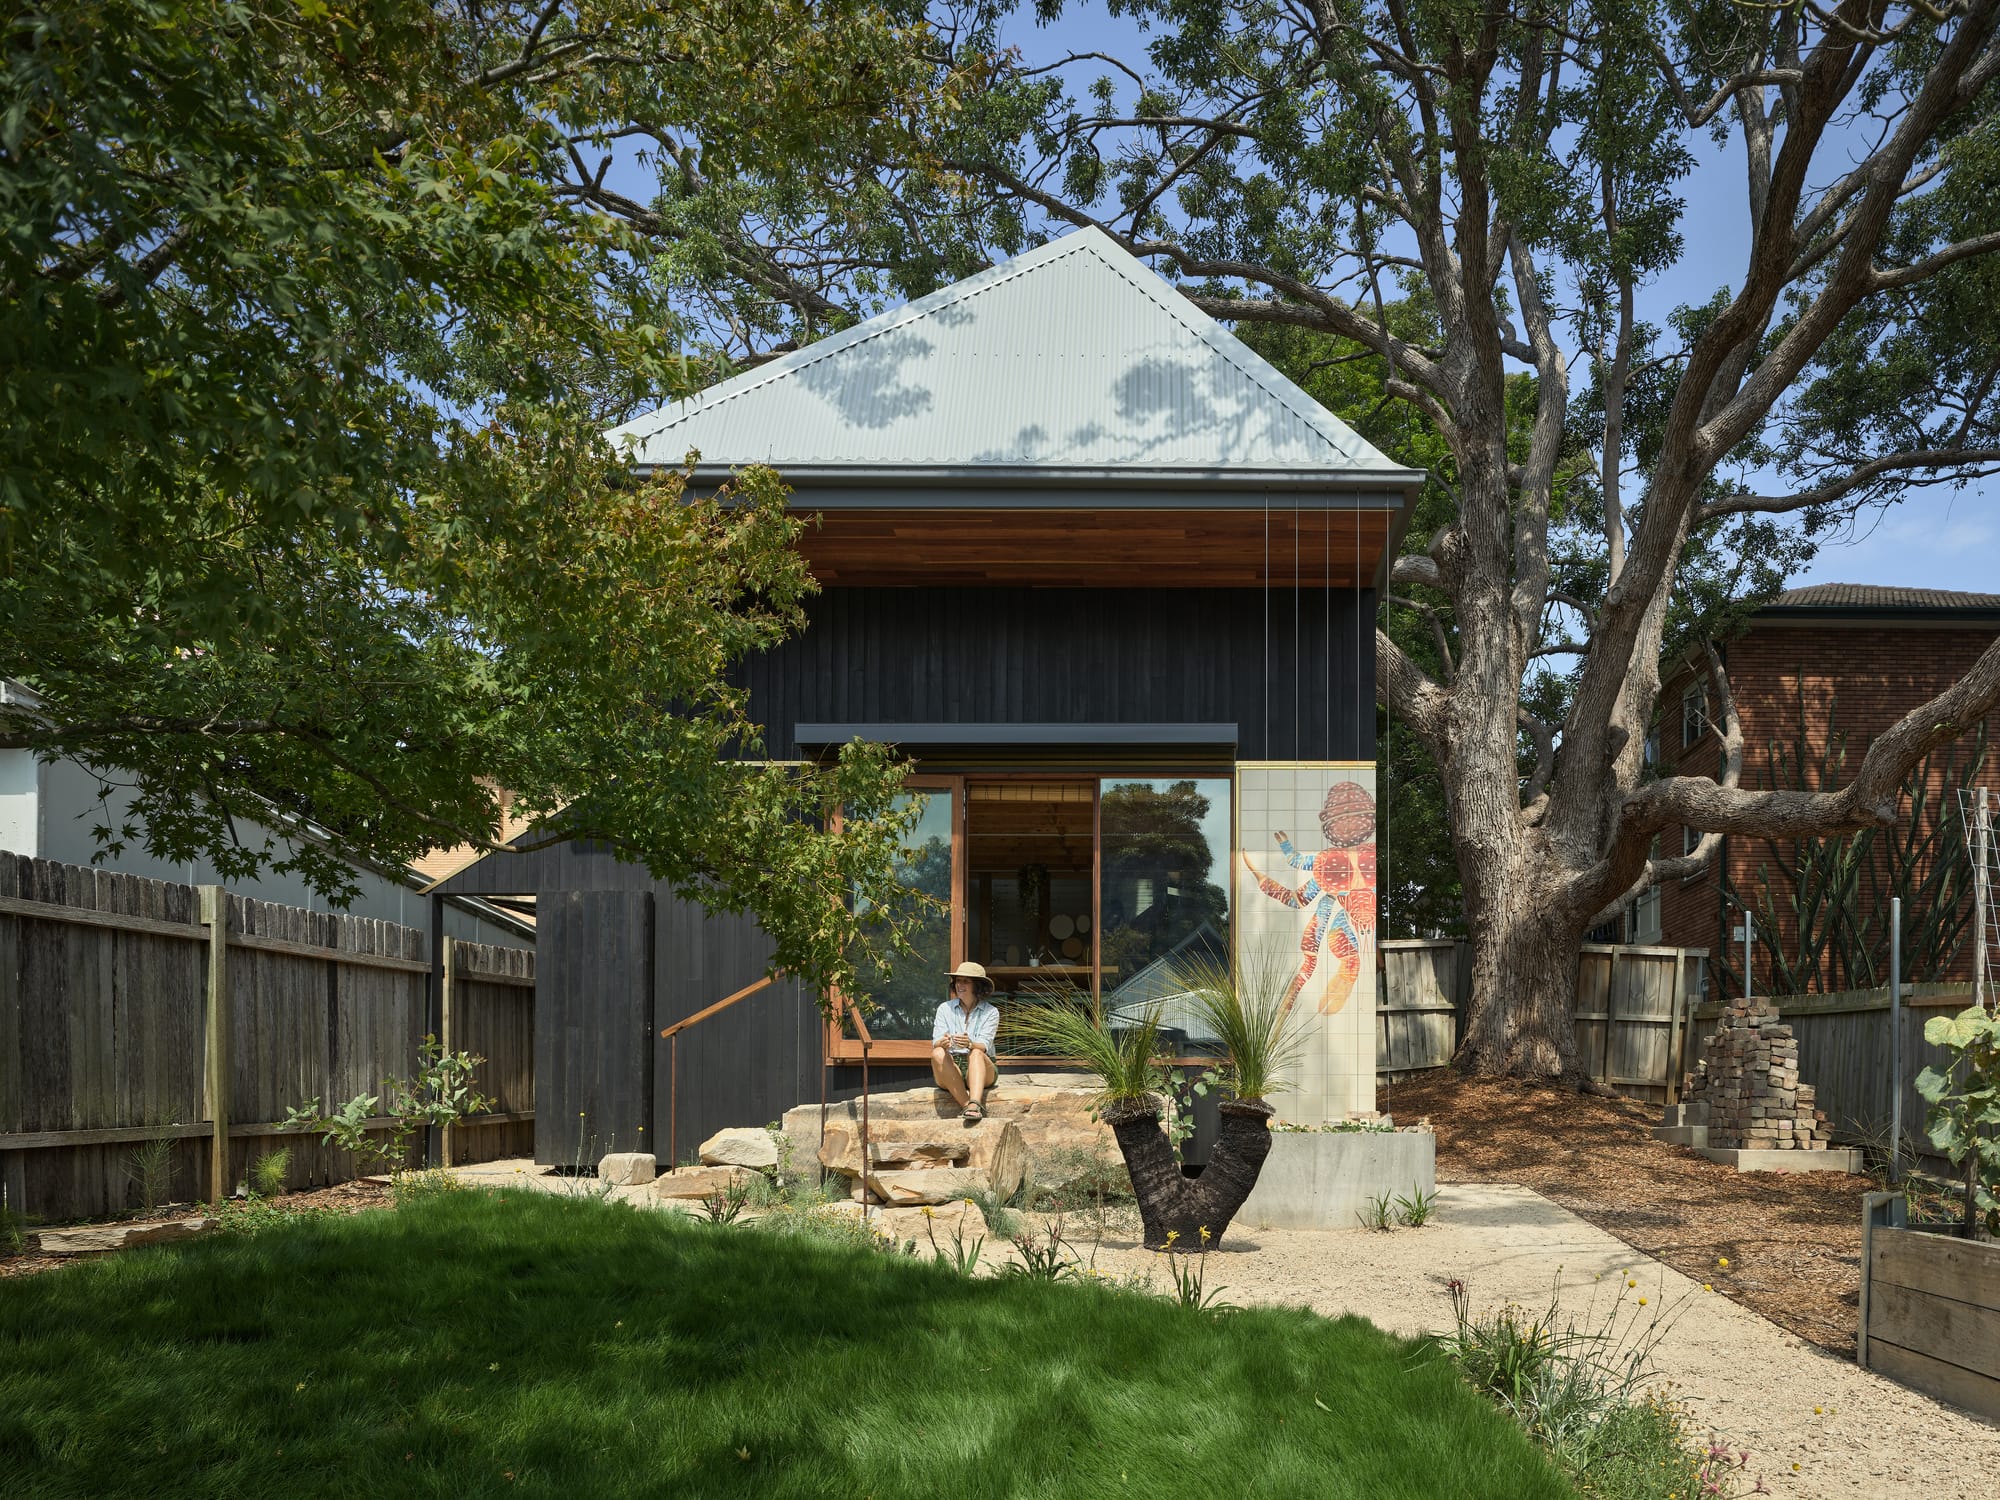 Coconut Crab by Alexander Symes Architect. Photography by Barton Taylor Photography. Outdoor studio with dark timber clad exterior and square tin roof. Surrounded by long green grass and vegetable patch.